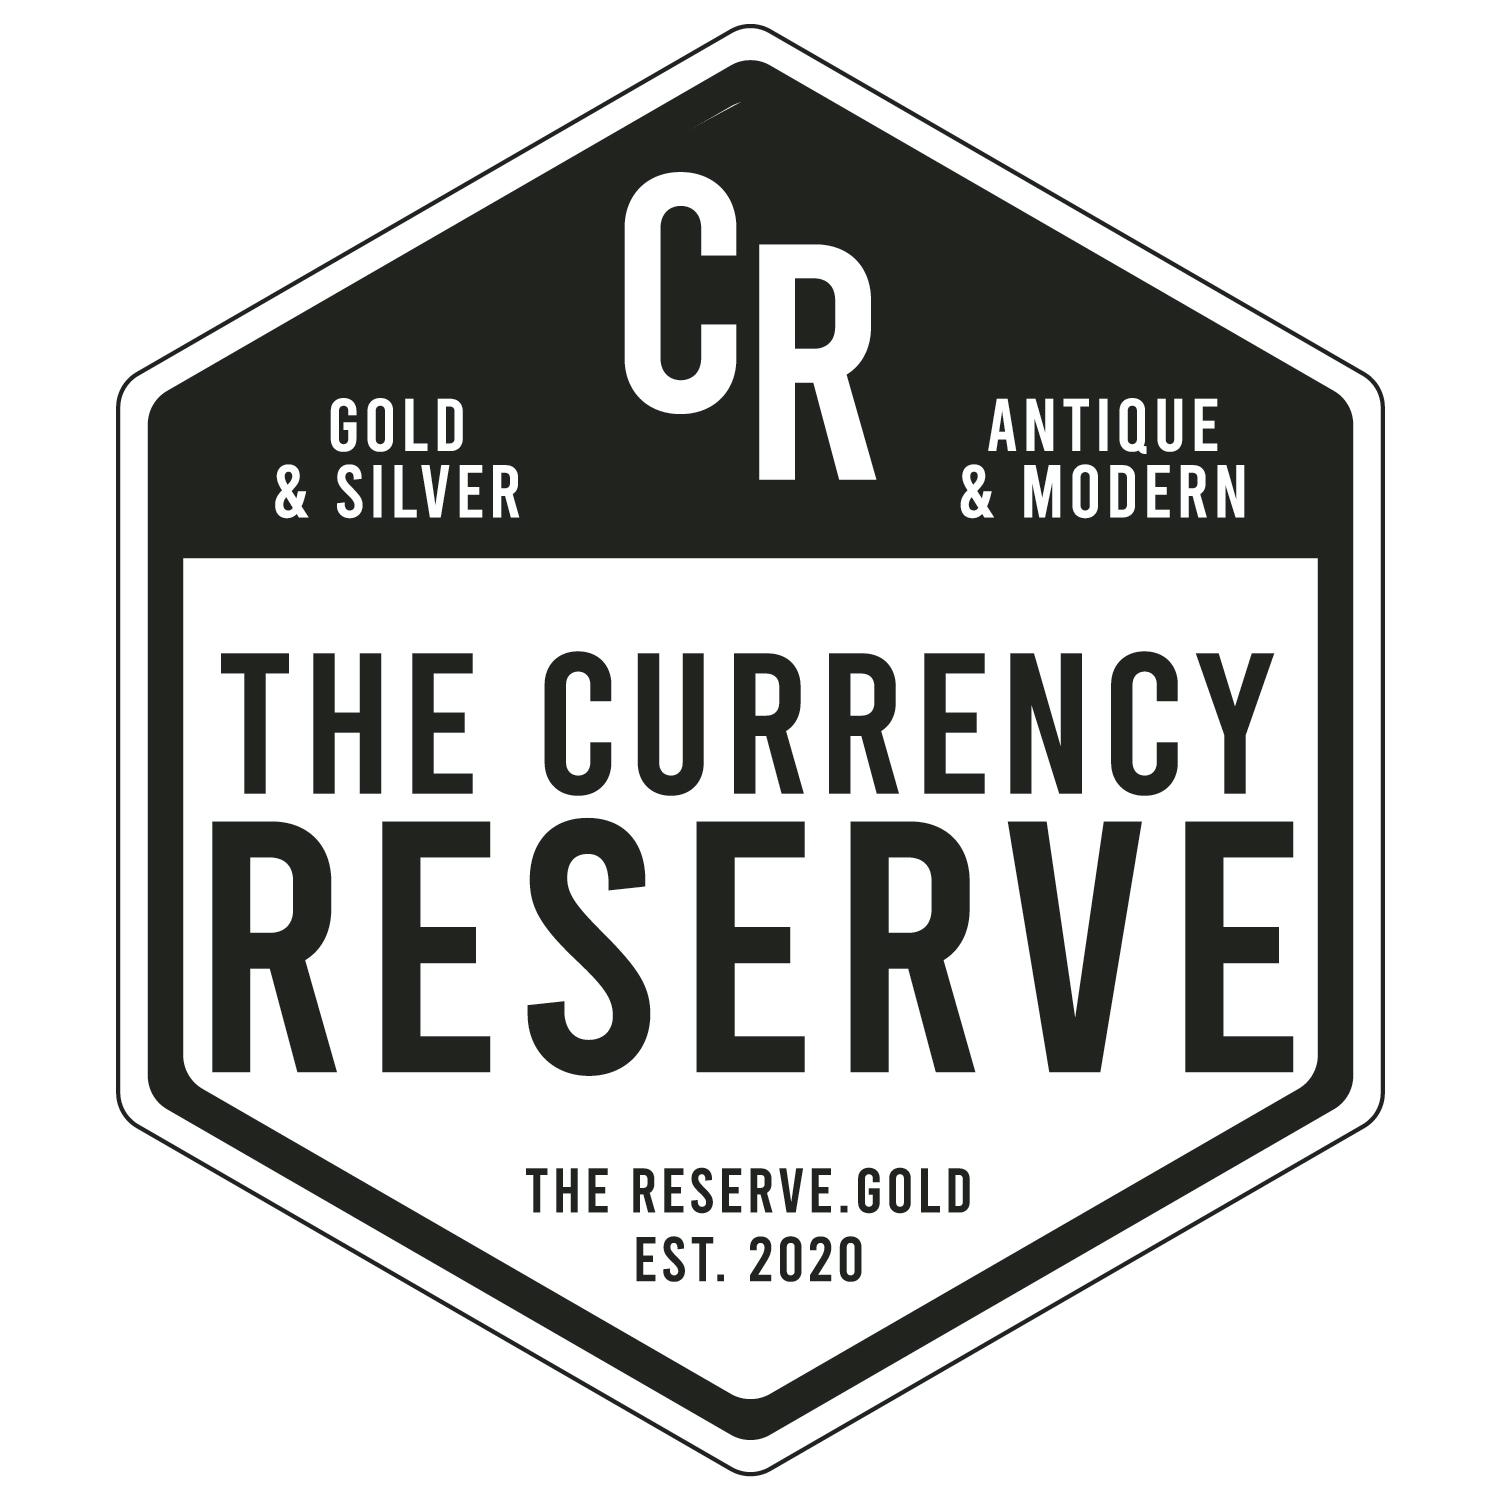 The Currency Reserve